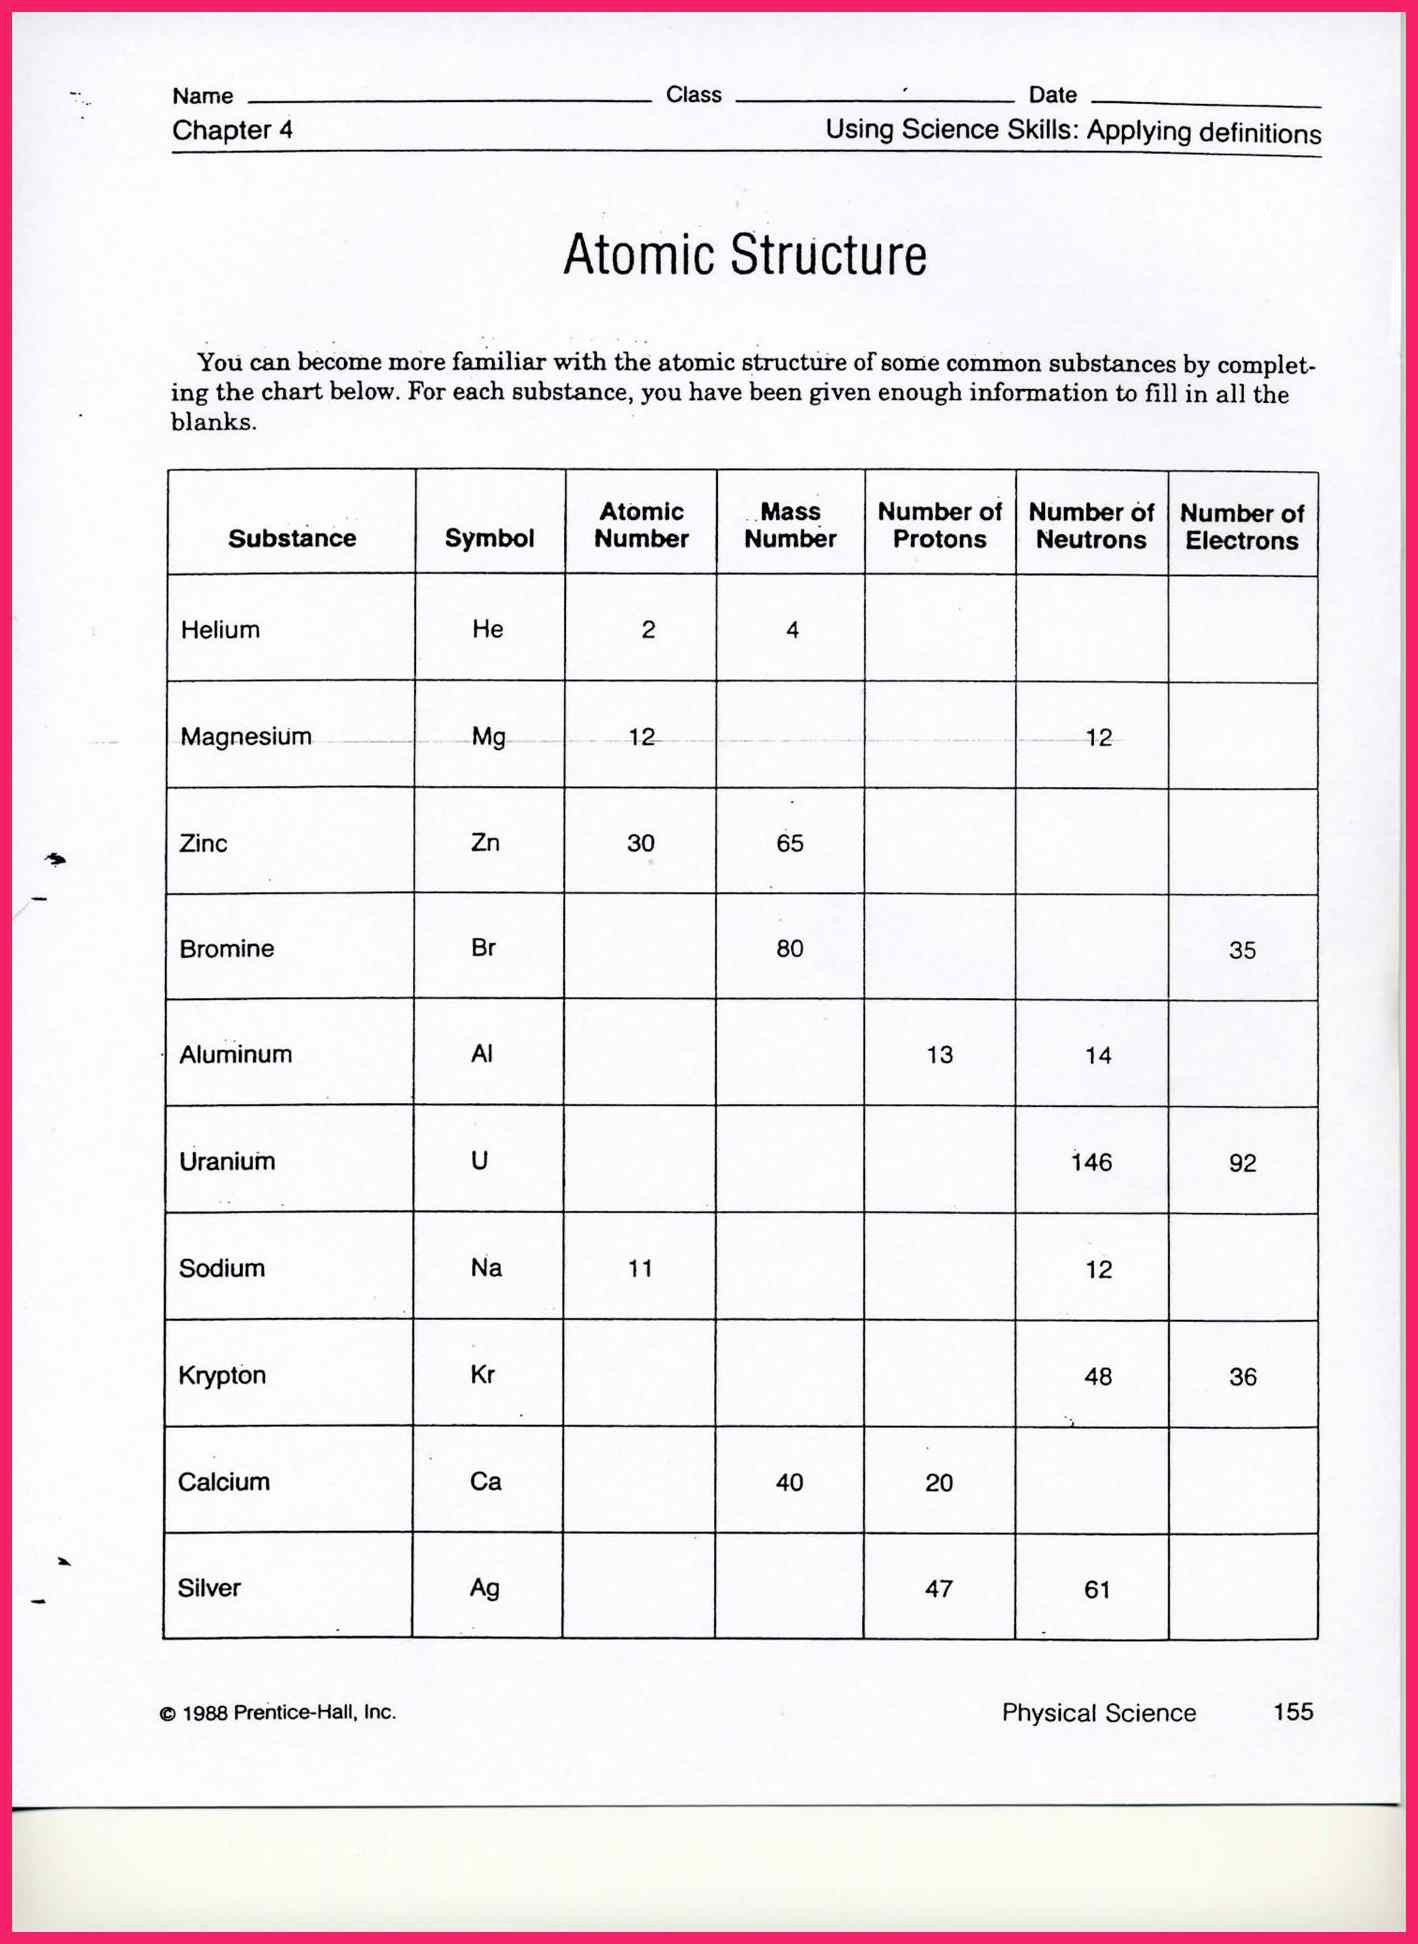 Atomic Structure Worksheet Answers Chemistry 30 Basic atomic Structure Worksheet Key Worksheet Project List